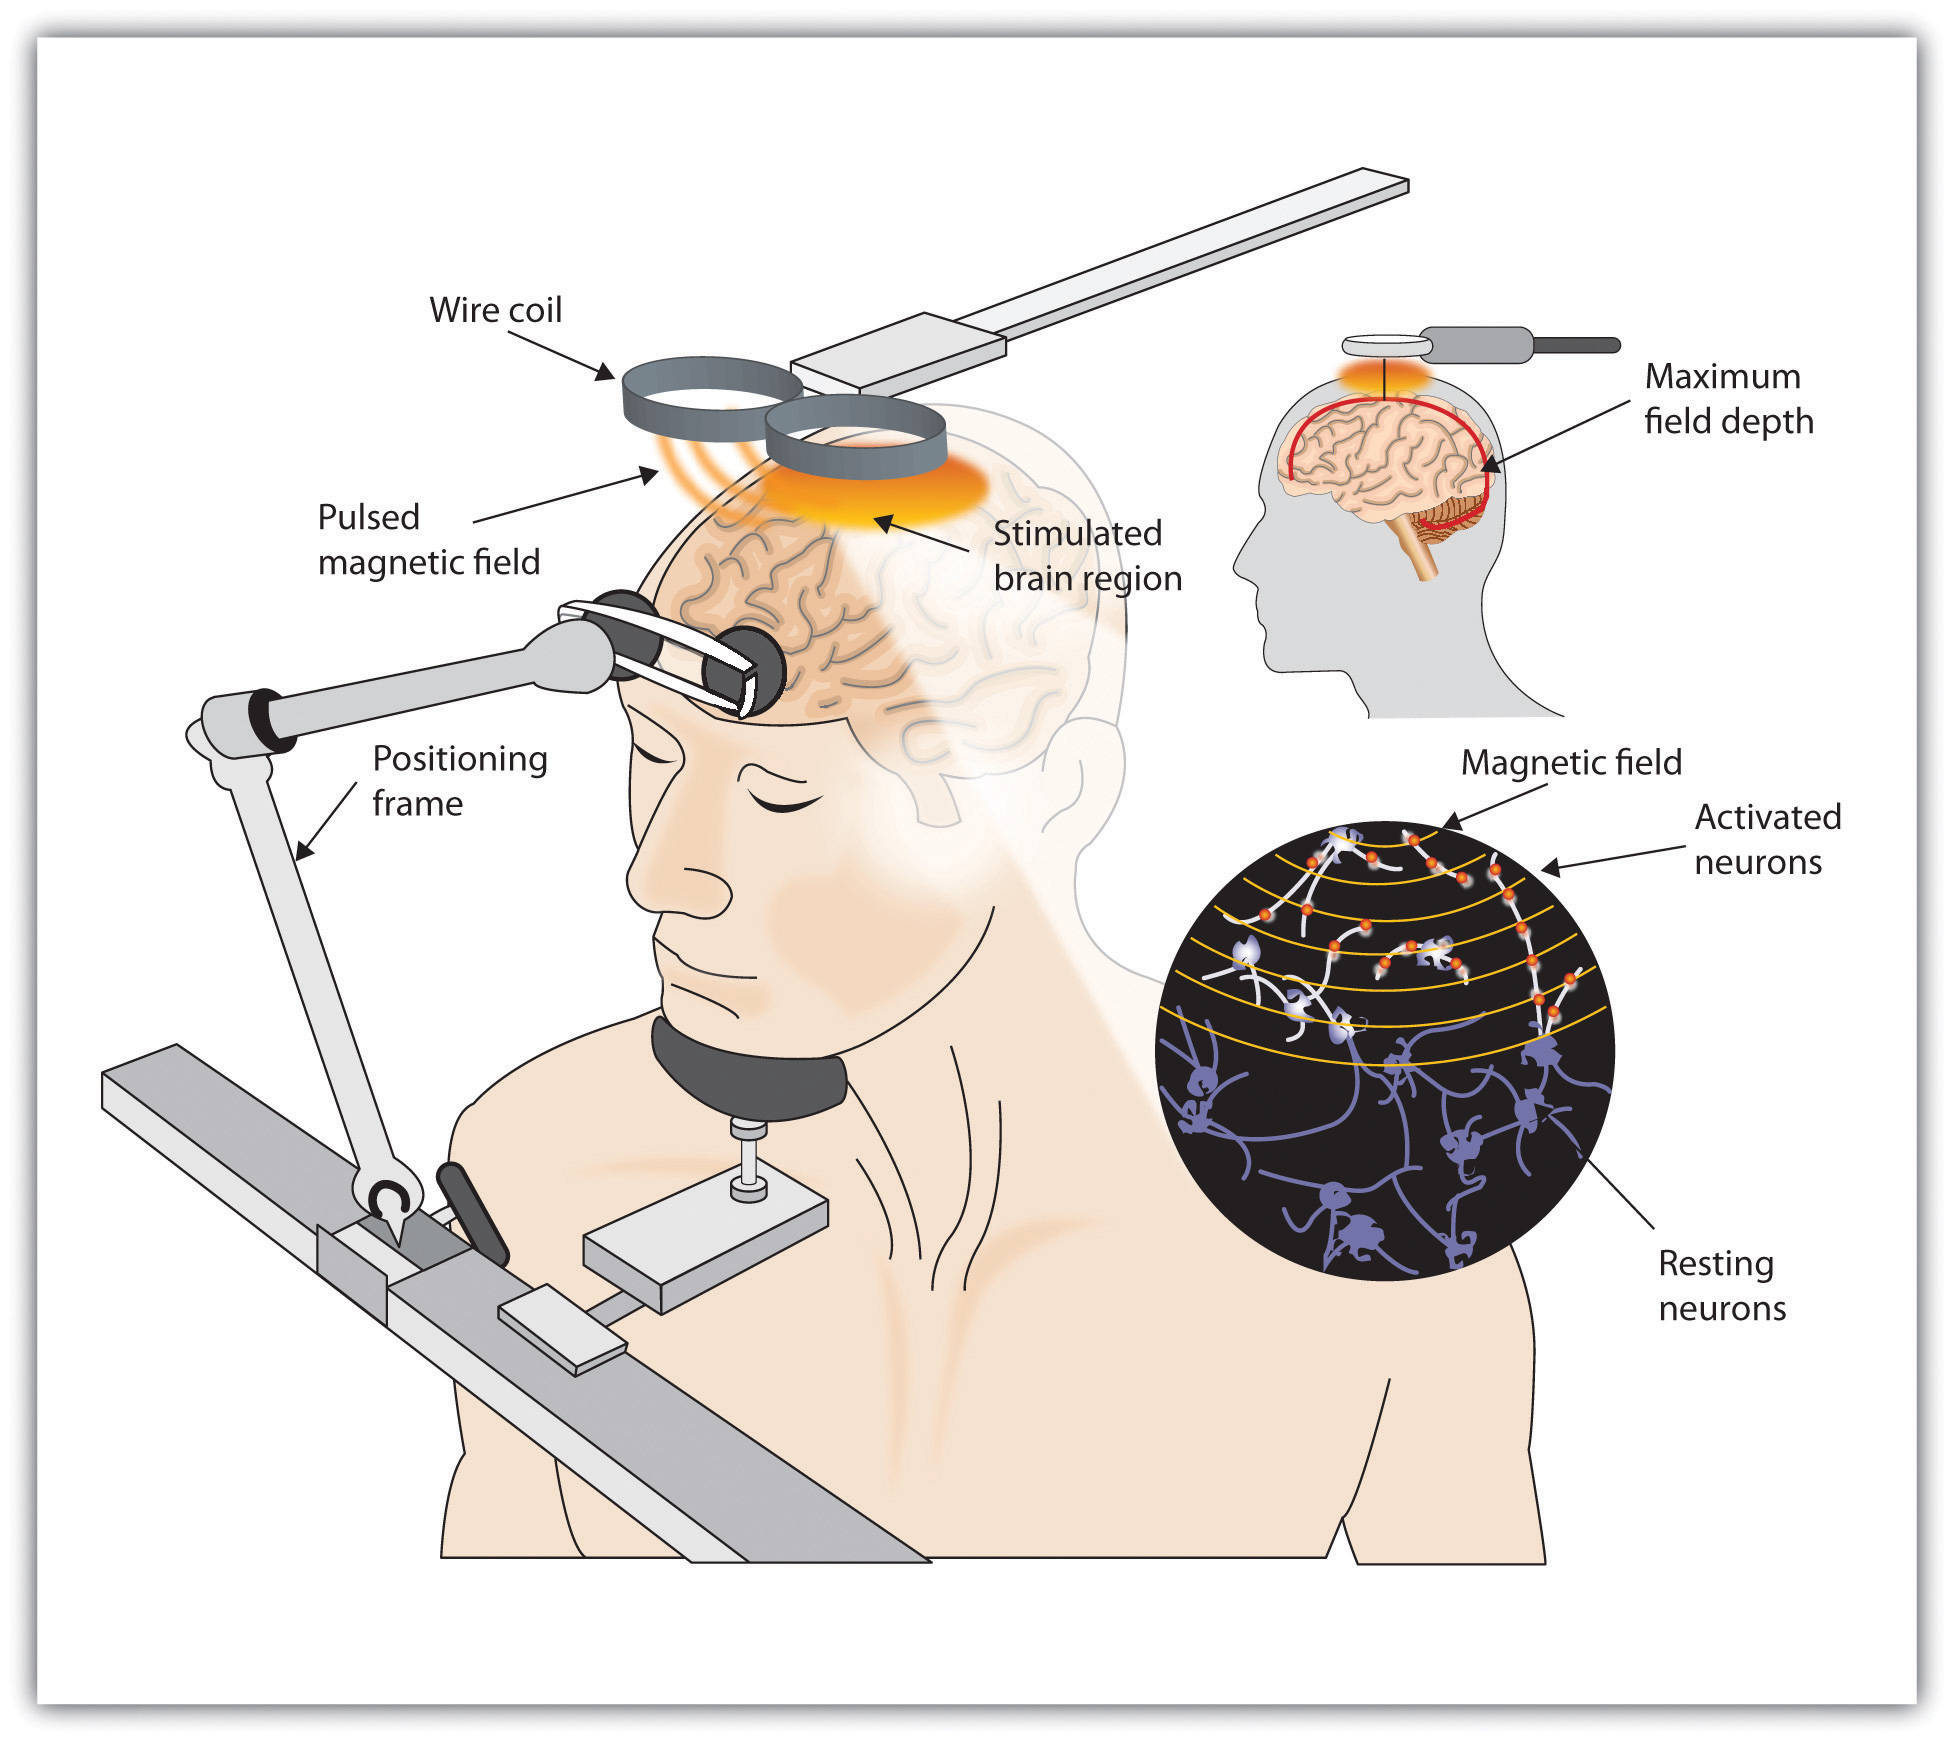 This diagram illustrates a man receiving transcranial magnetic stimulation (TMS) in which two wire coils pulse a magnetic field to electrically stimulate his brain.